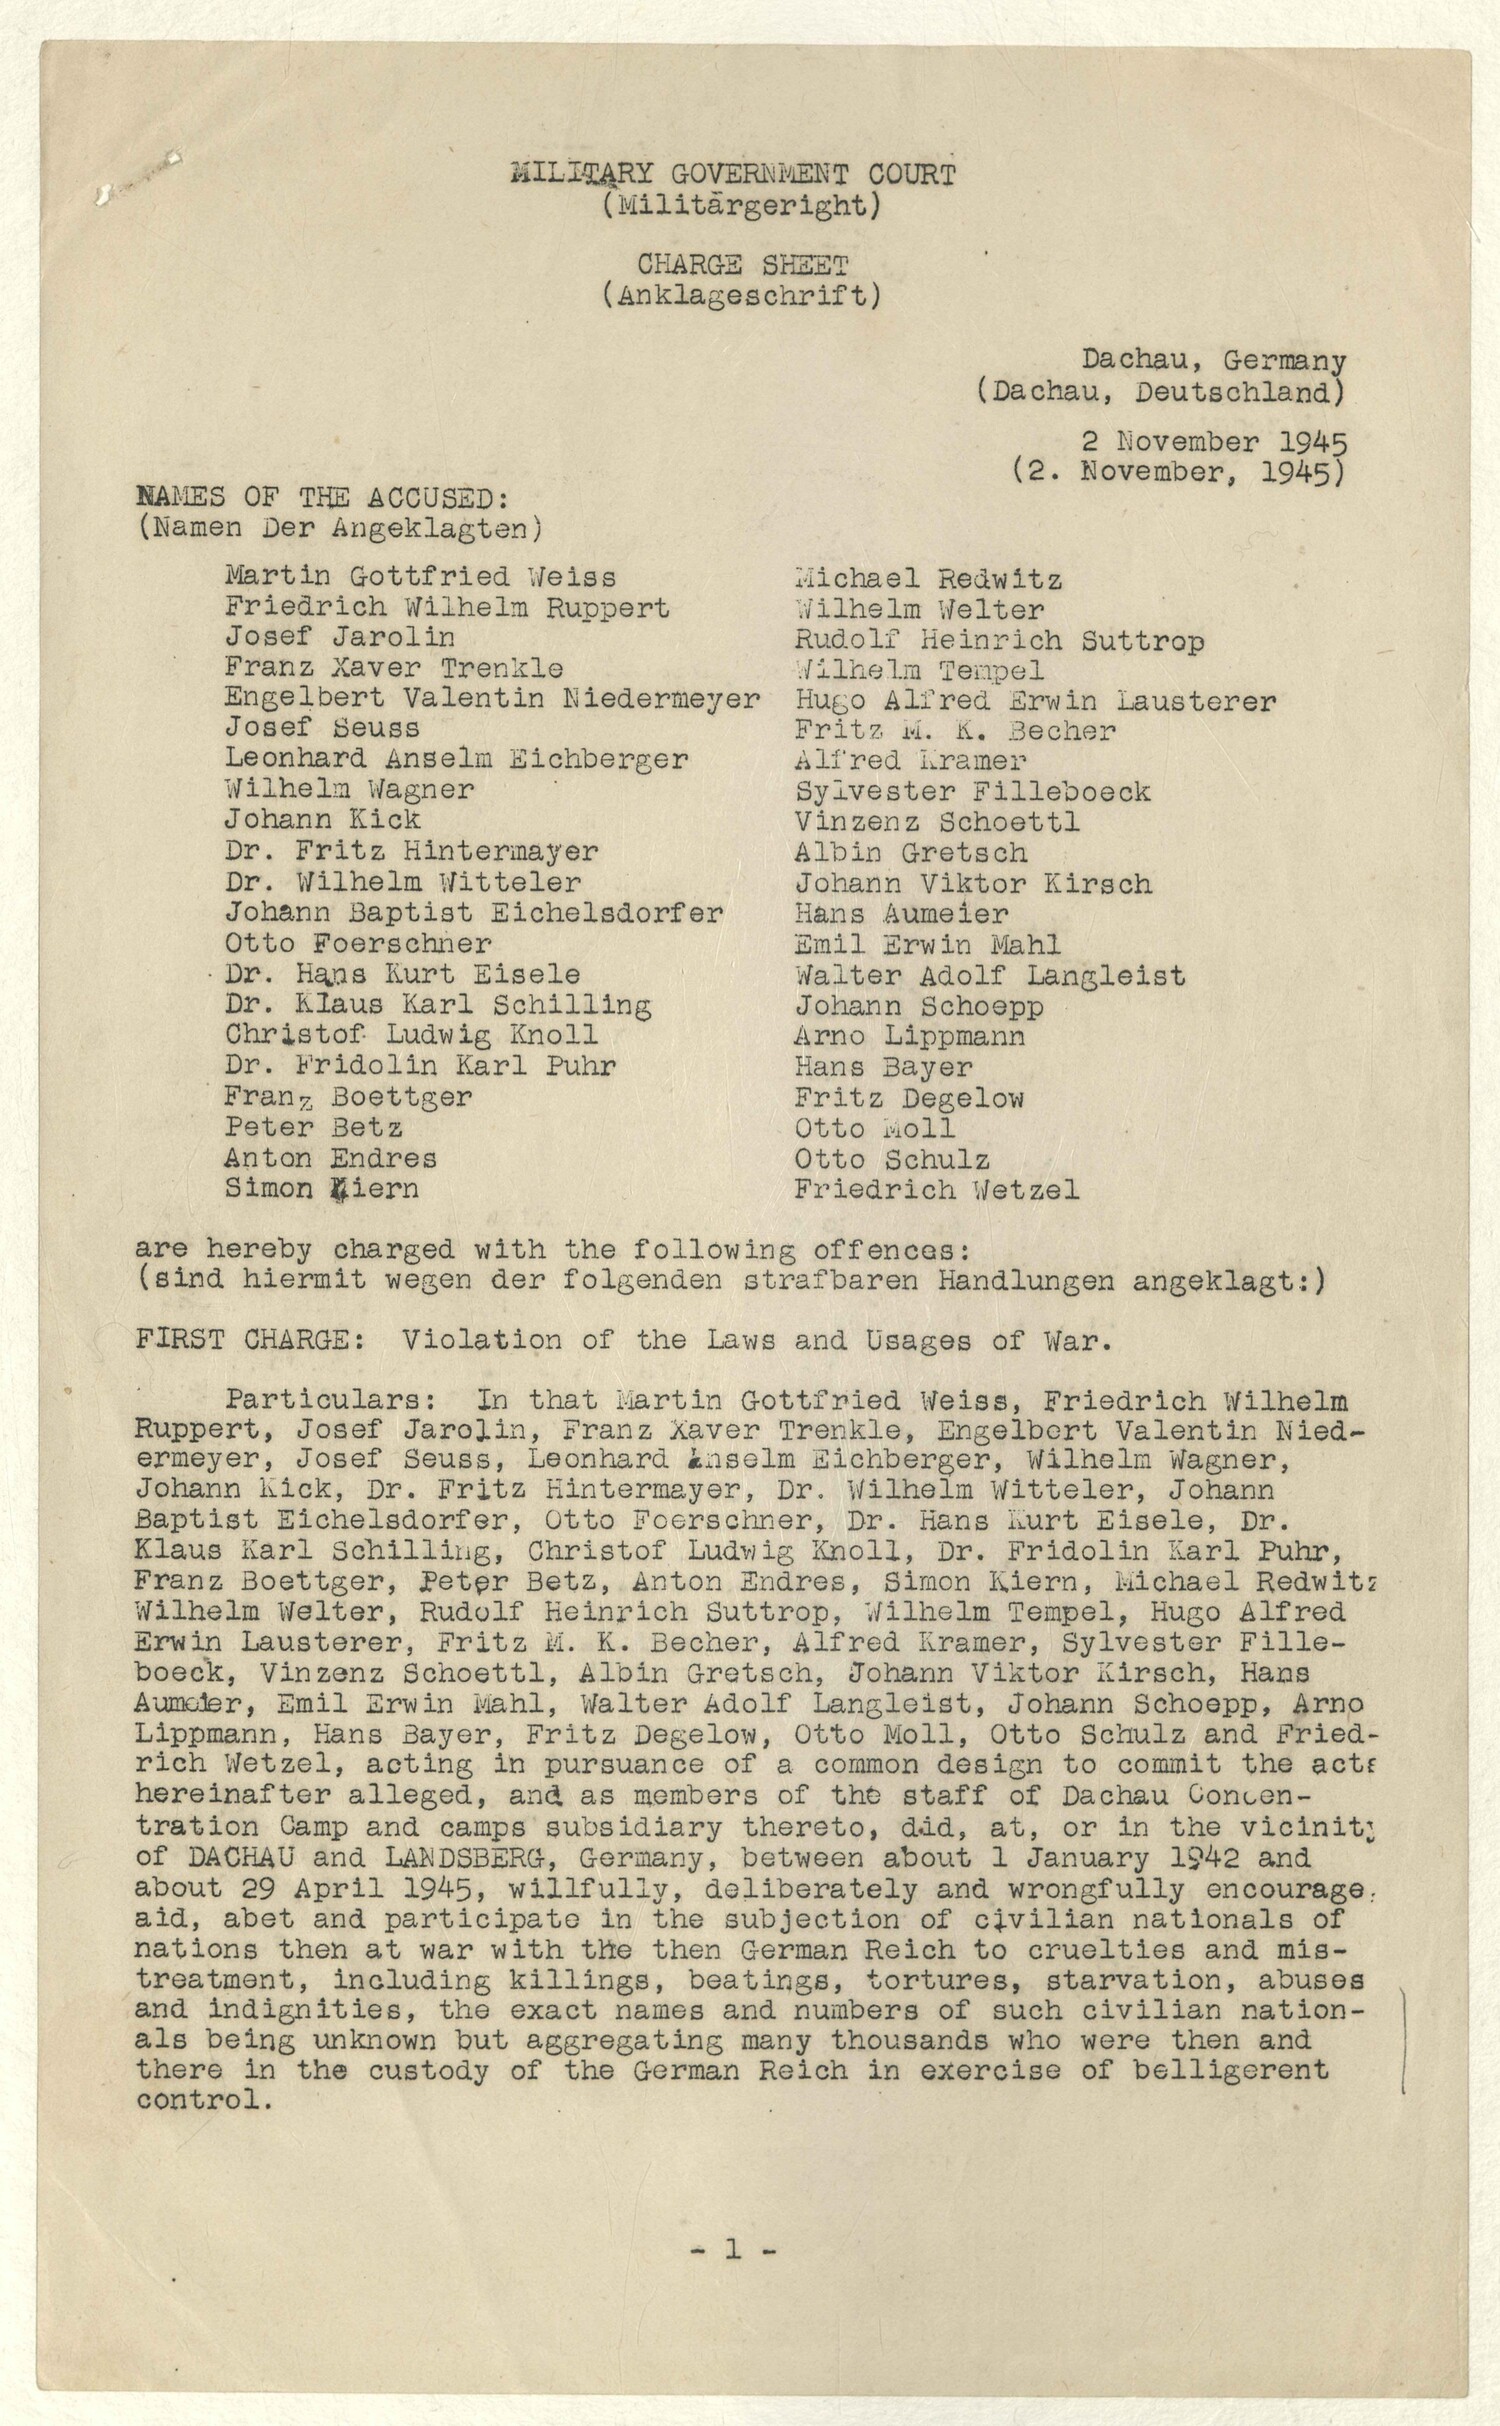 Military-Government-Court-Charge-Sheet-11-2-45.jpg